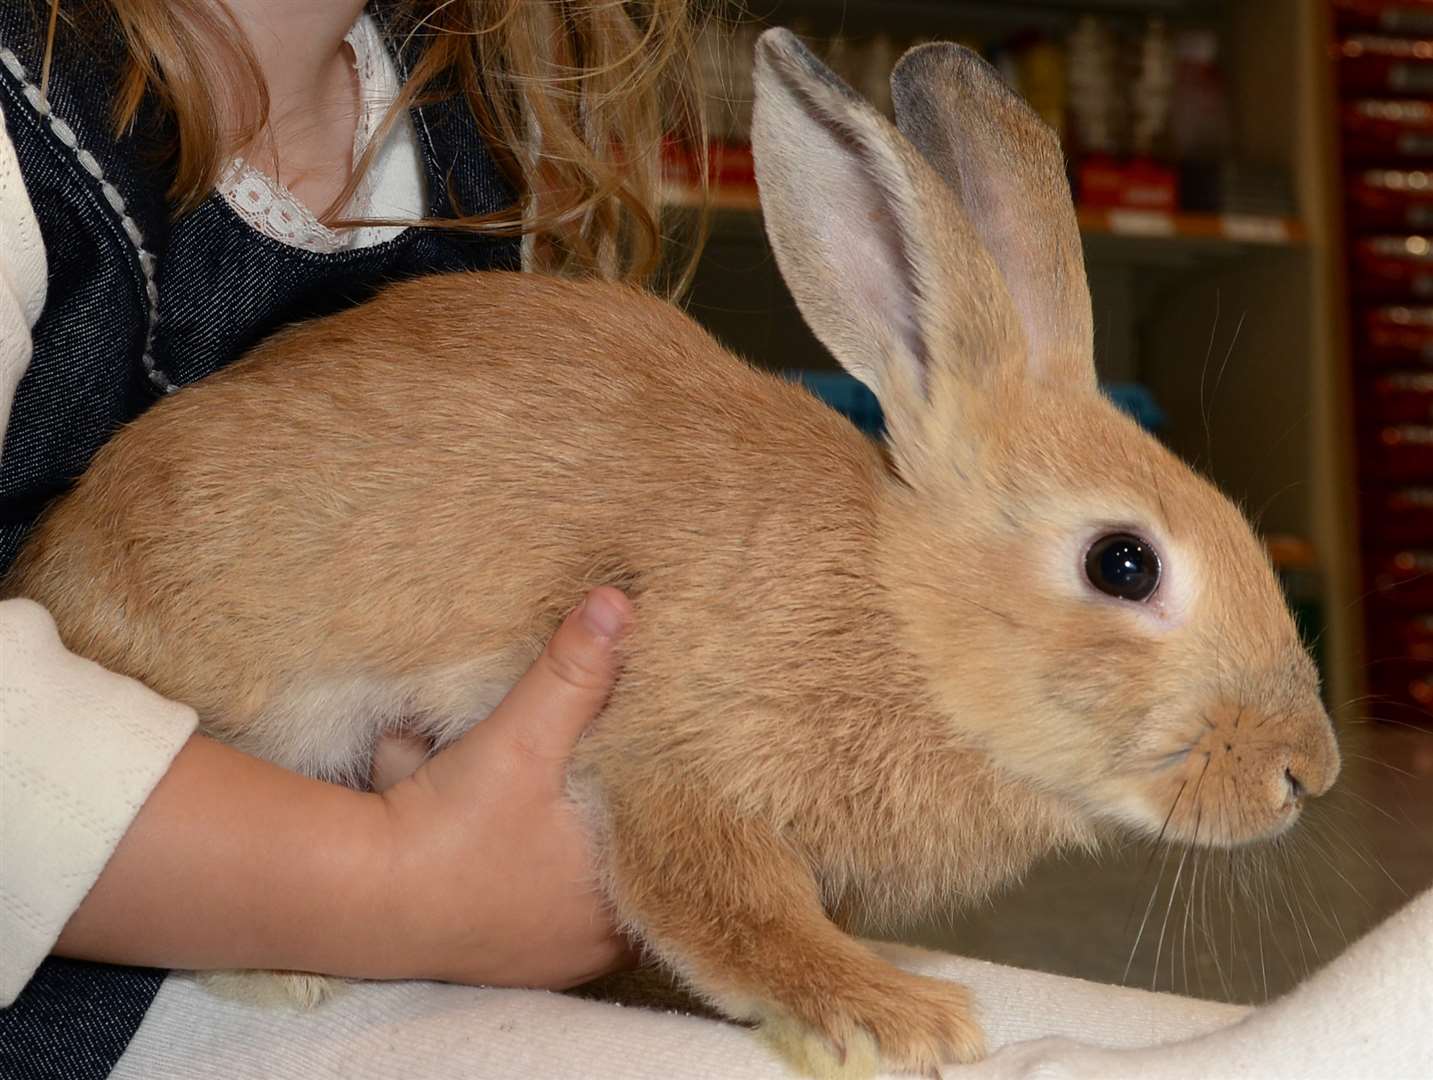 Pet rabbits could be at risk after two incidents being looked into by police